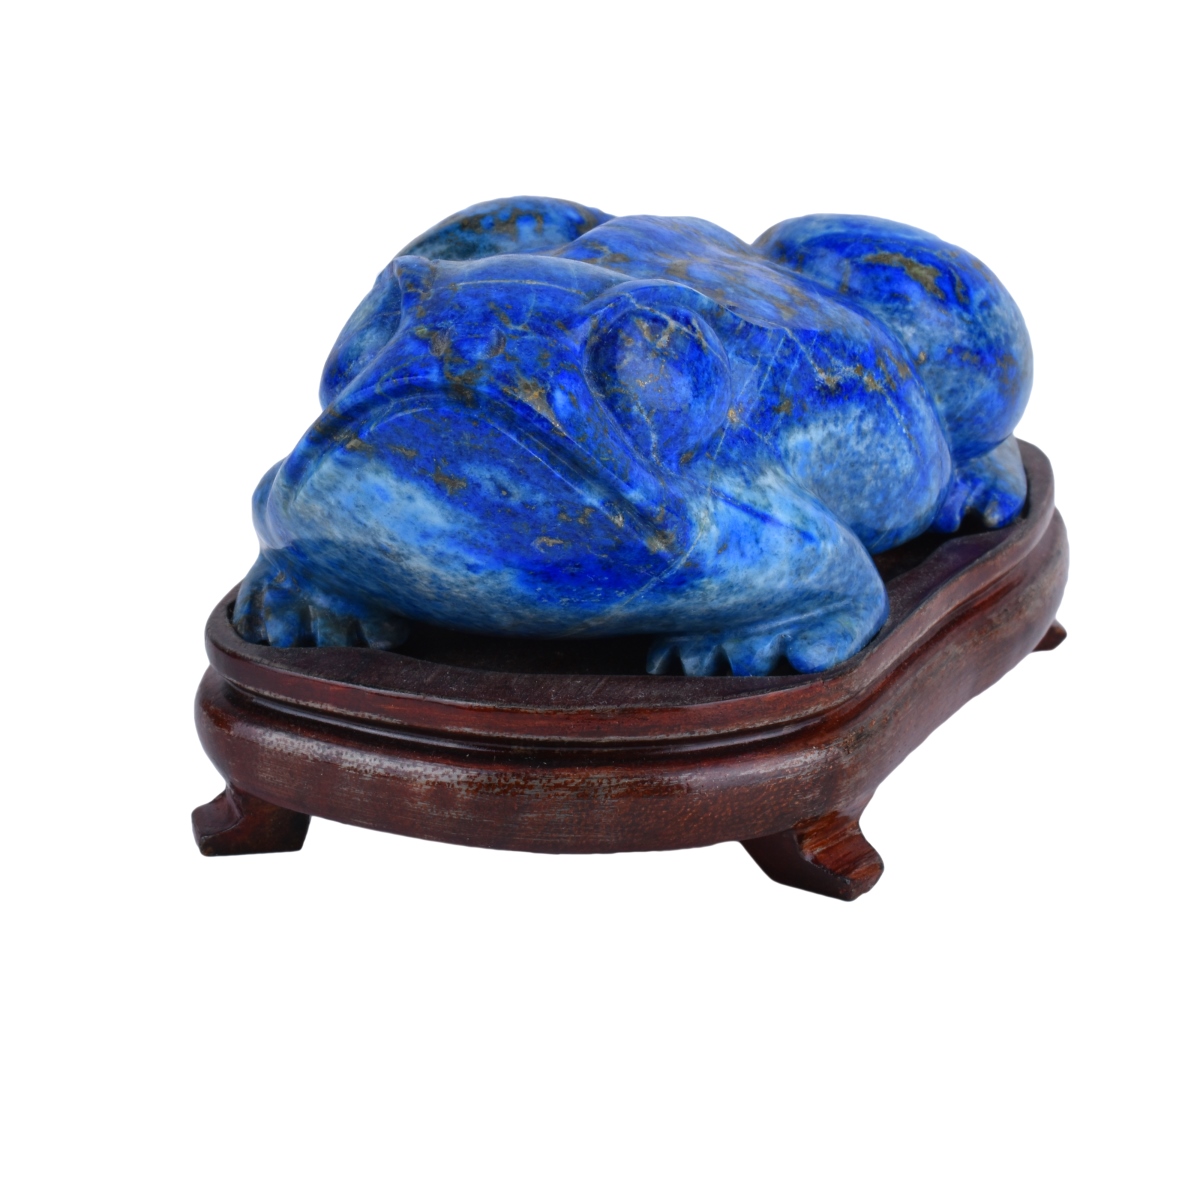 Two (2) Piece Chinese Carved Lapis Lazuli Group